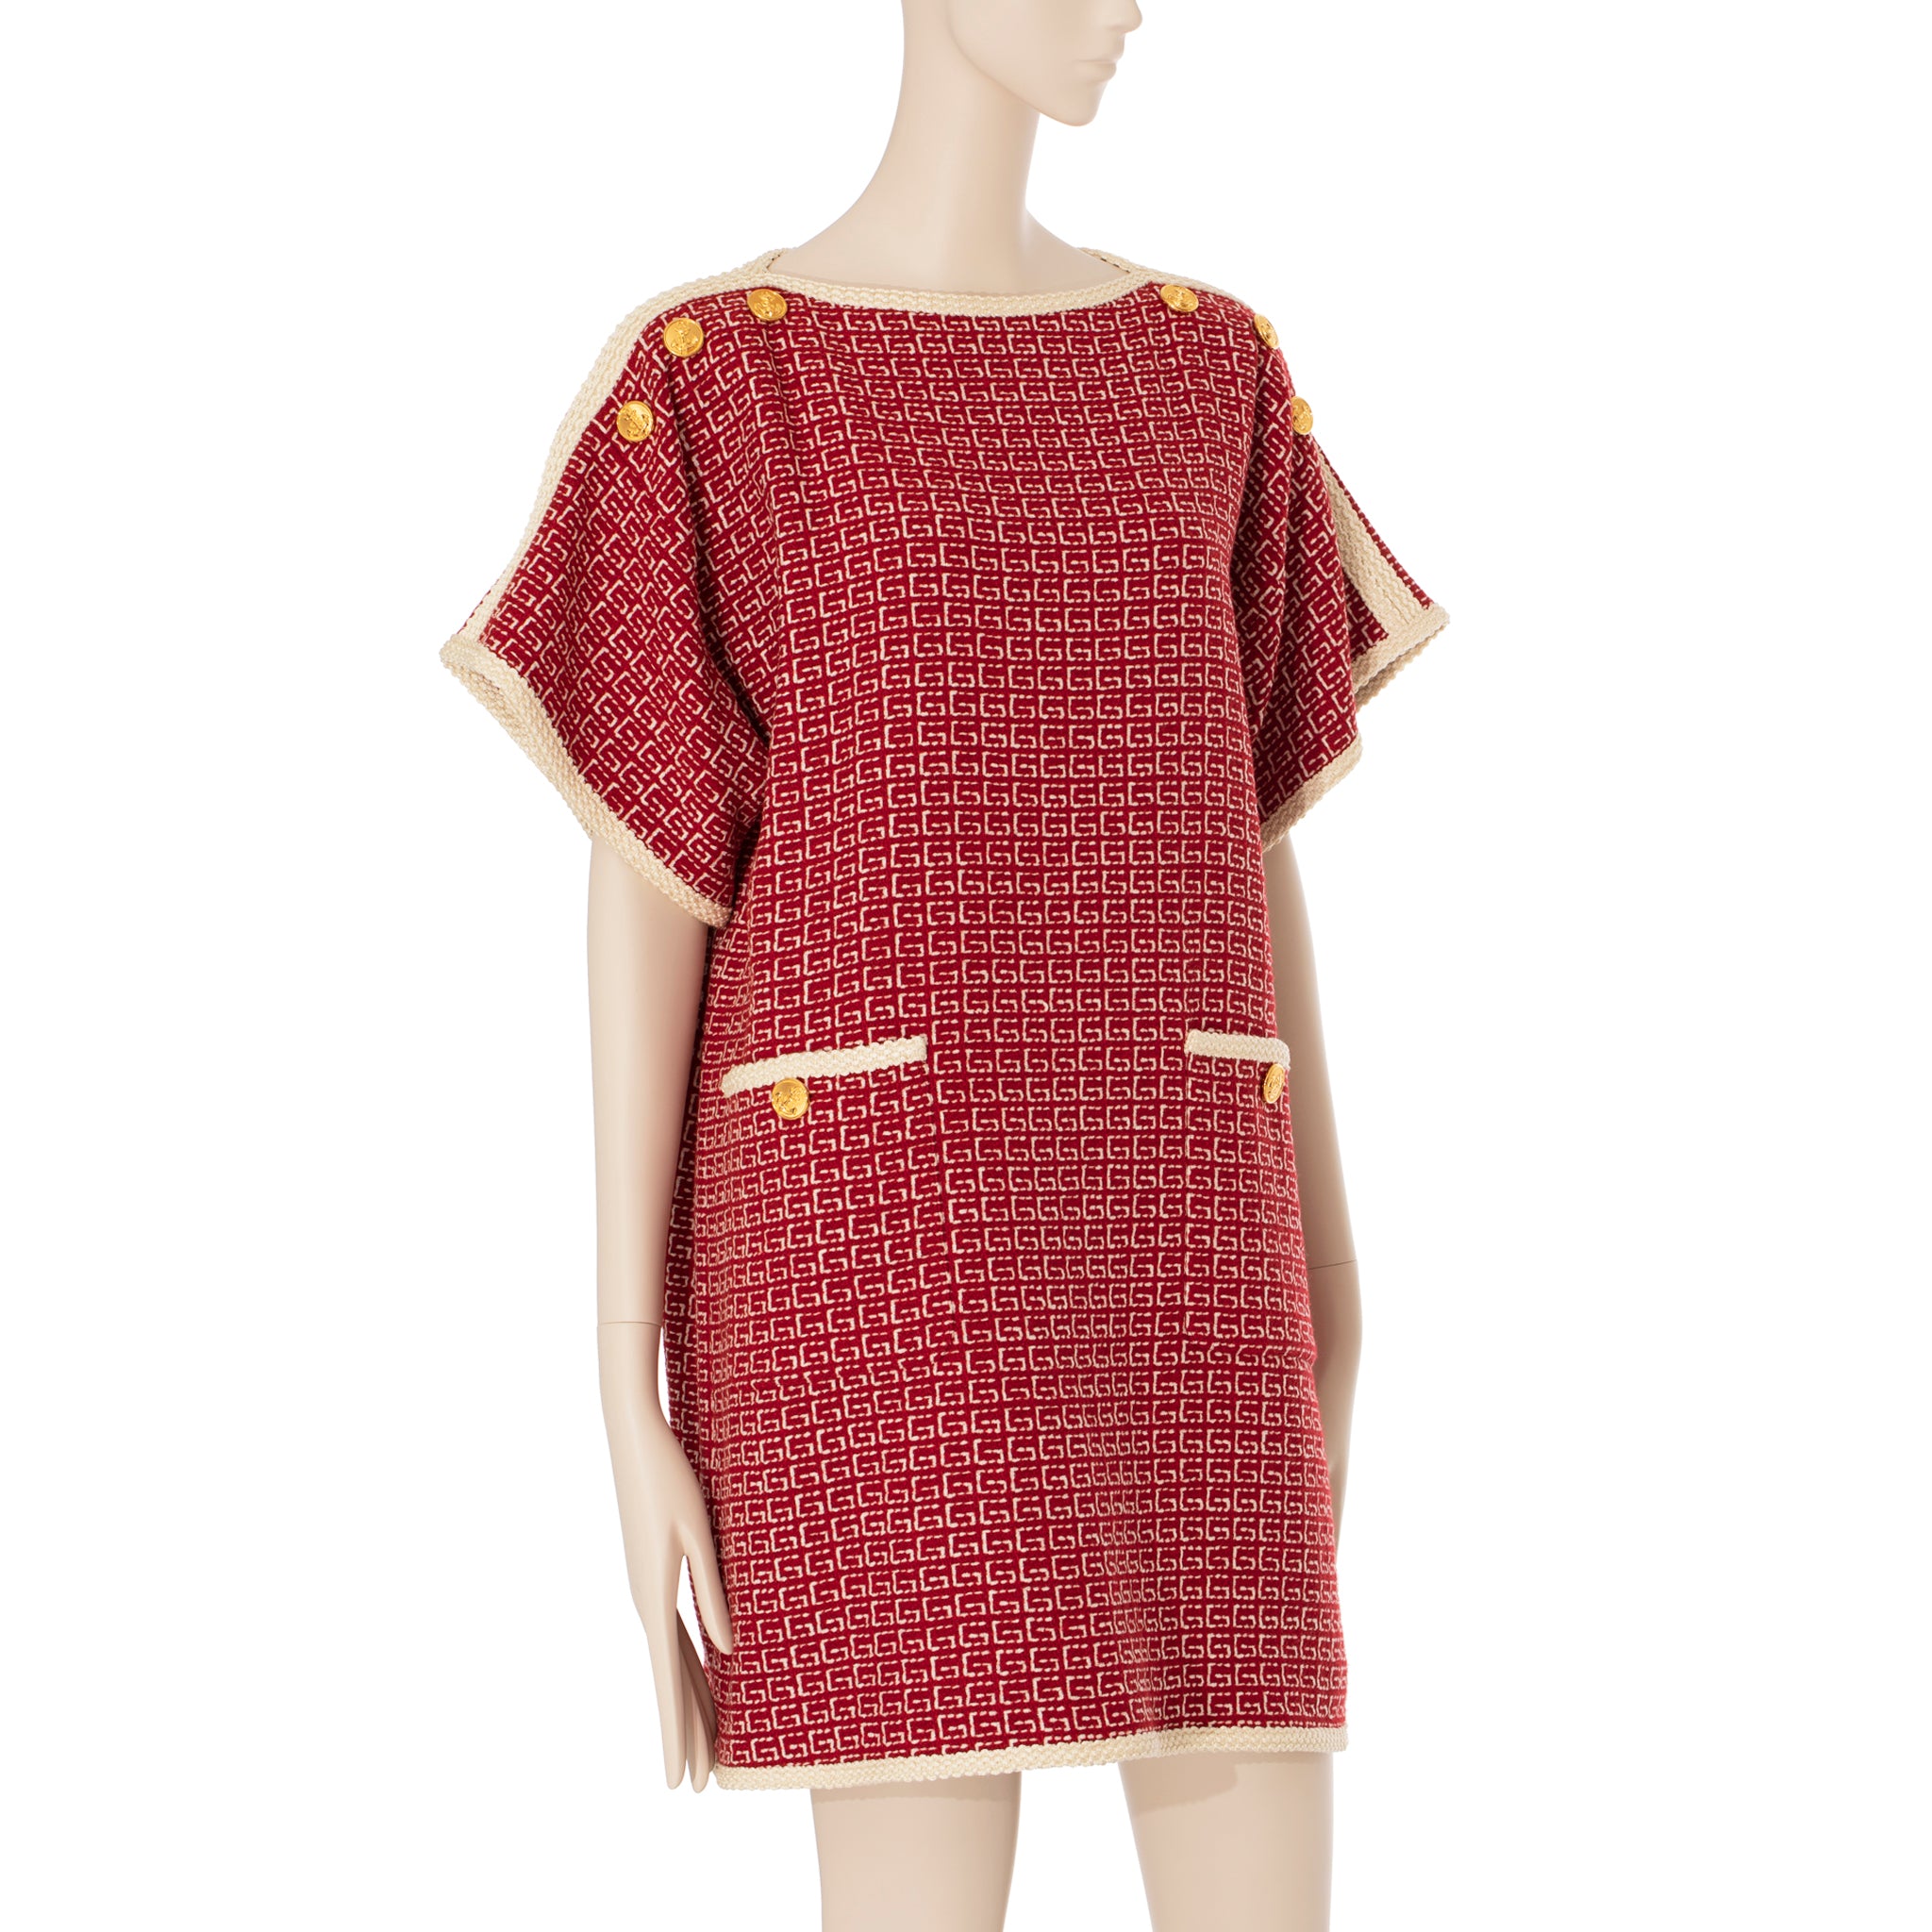 Gucci Tweed Red & Off-White Tunic Dress 38 IT